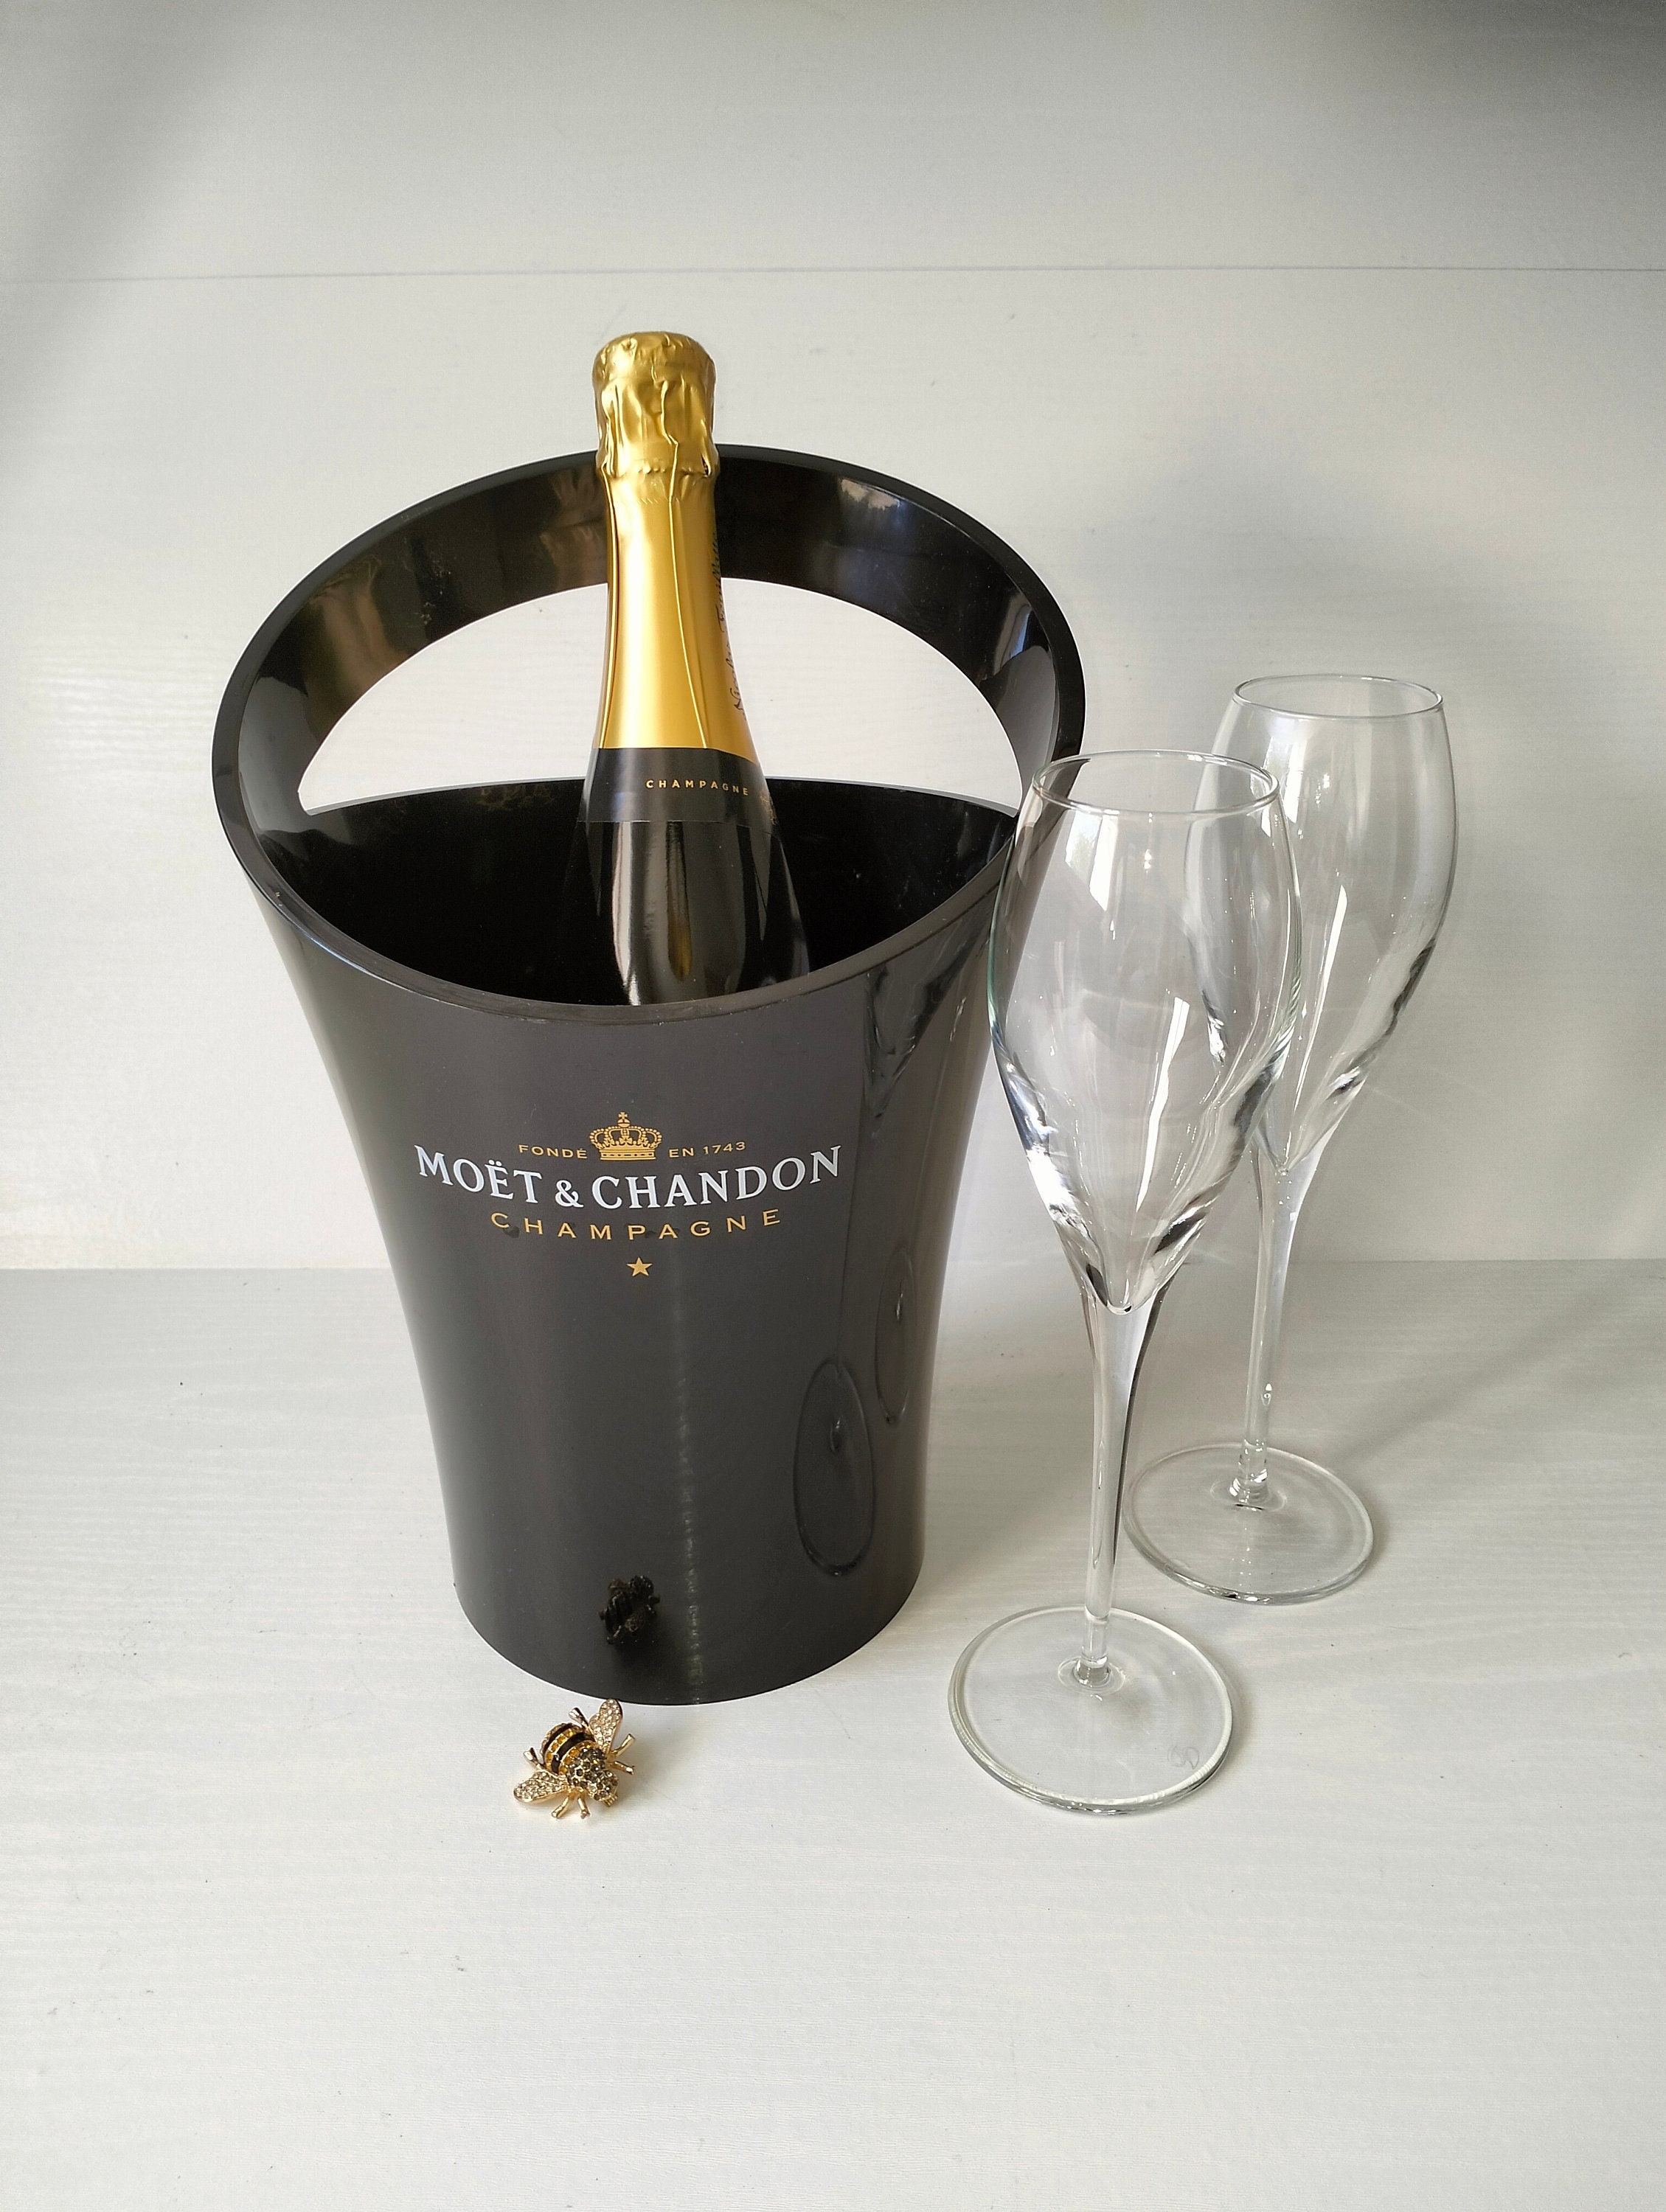 Just add champagne! This ice bucket mold is one of my favorite gadgets